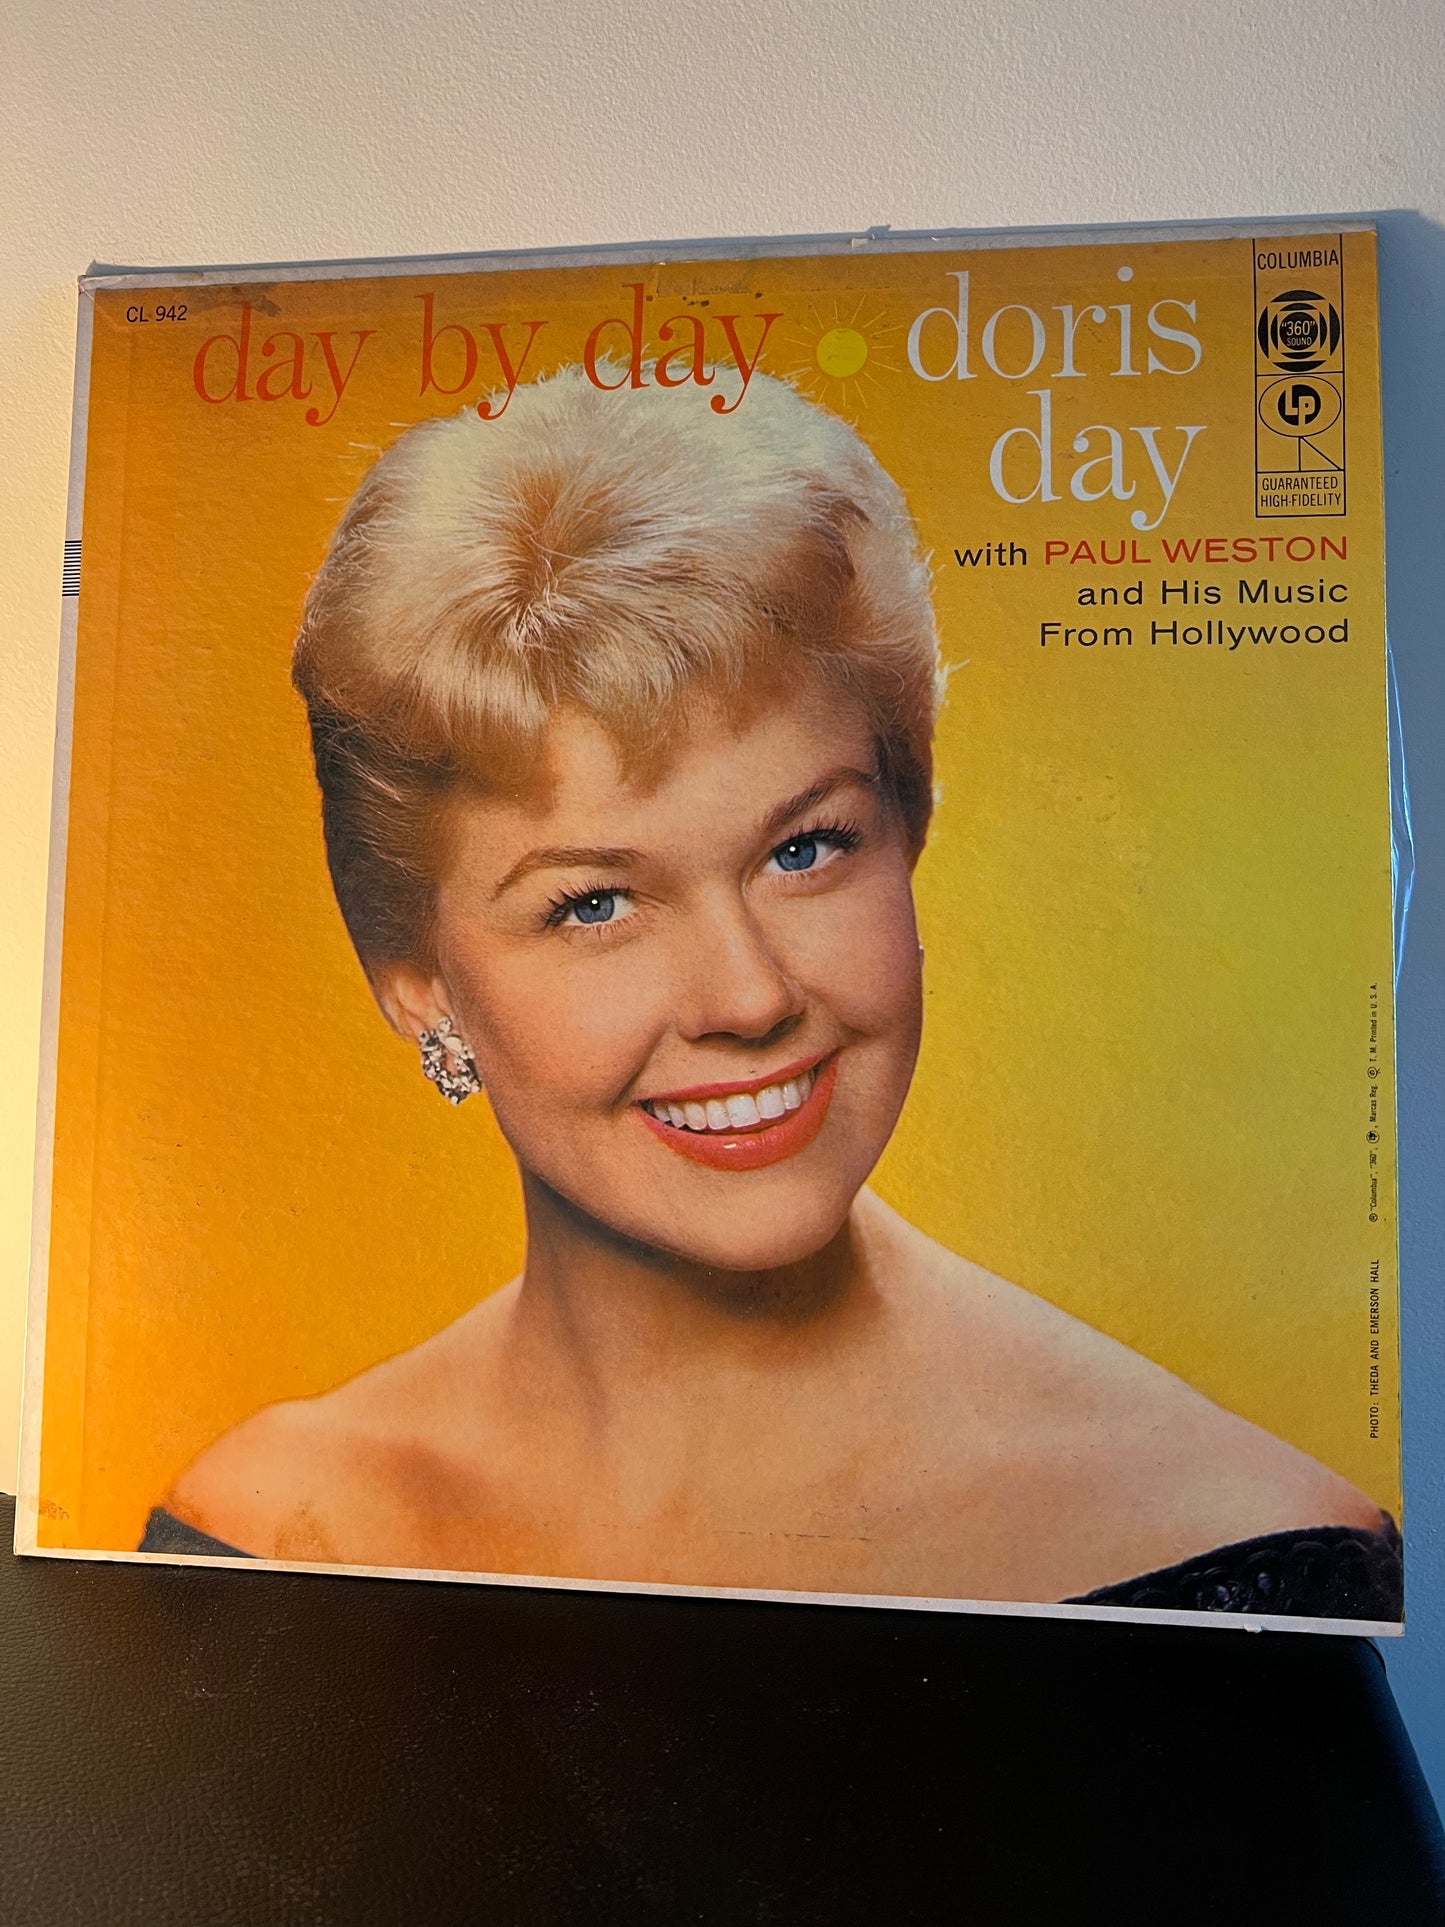 Doris Day Day By Day 33 RPM LP Record Columbia 1956 CL 942